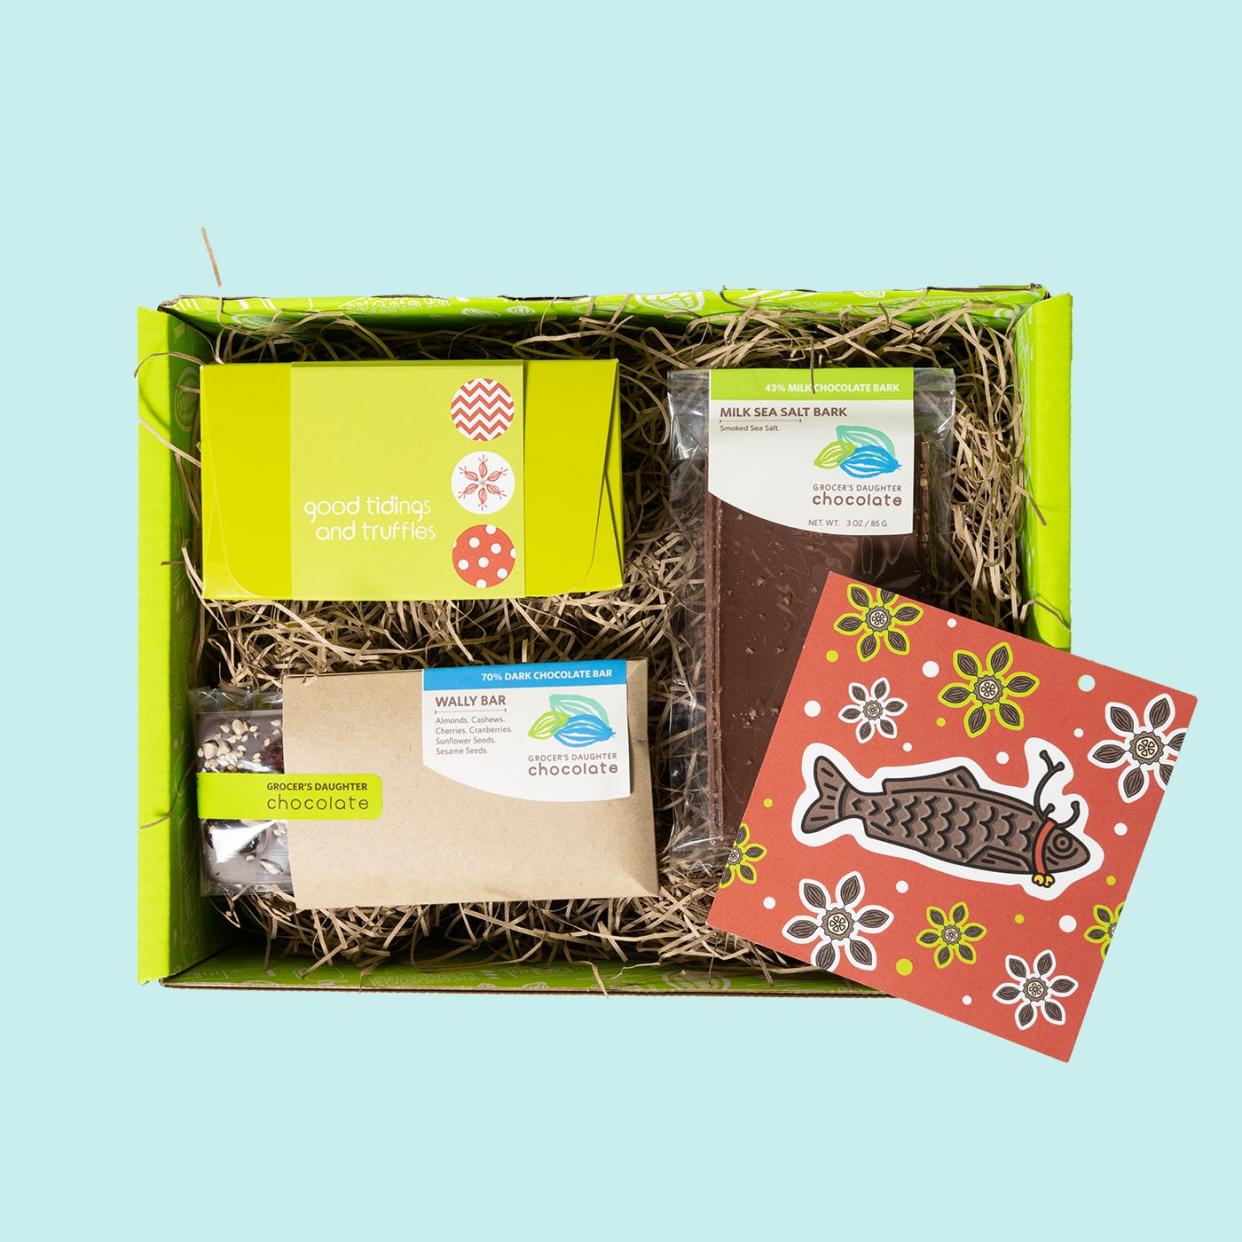 Grocer's Daughter Chocolate sweet surprise gift set.